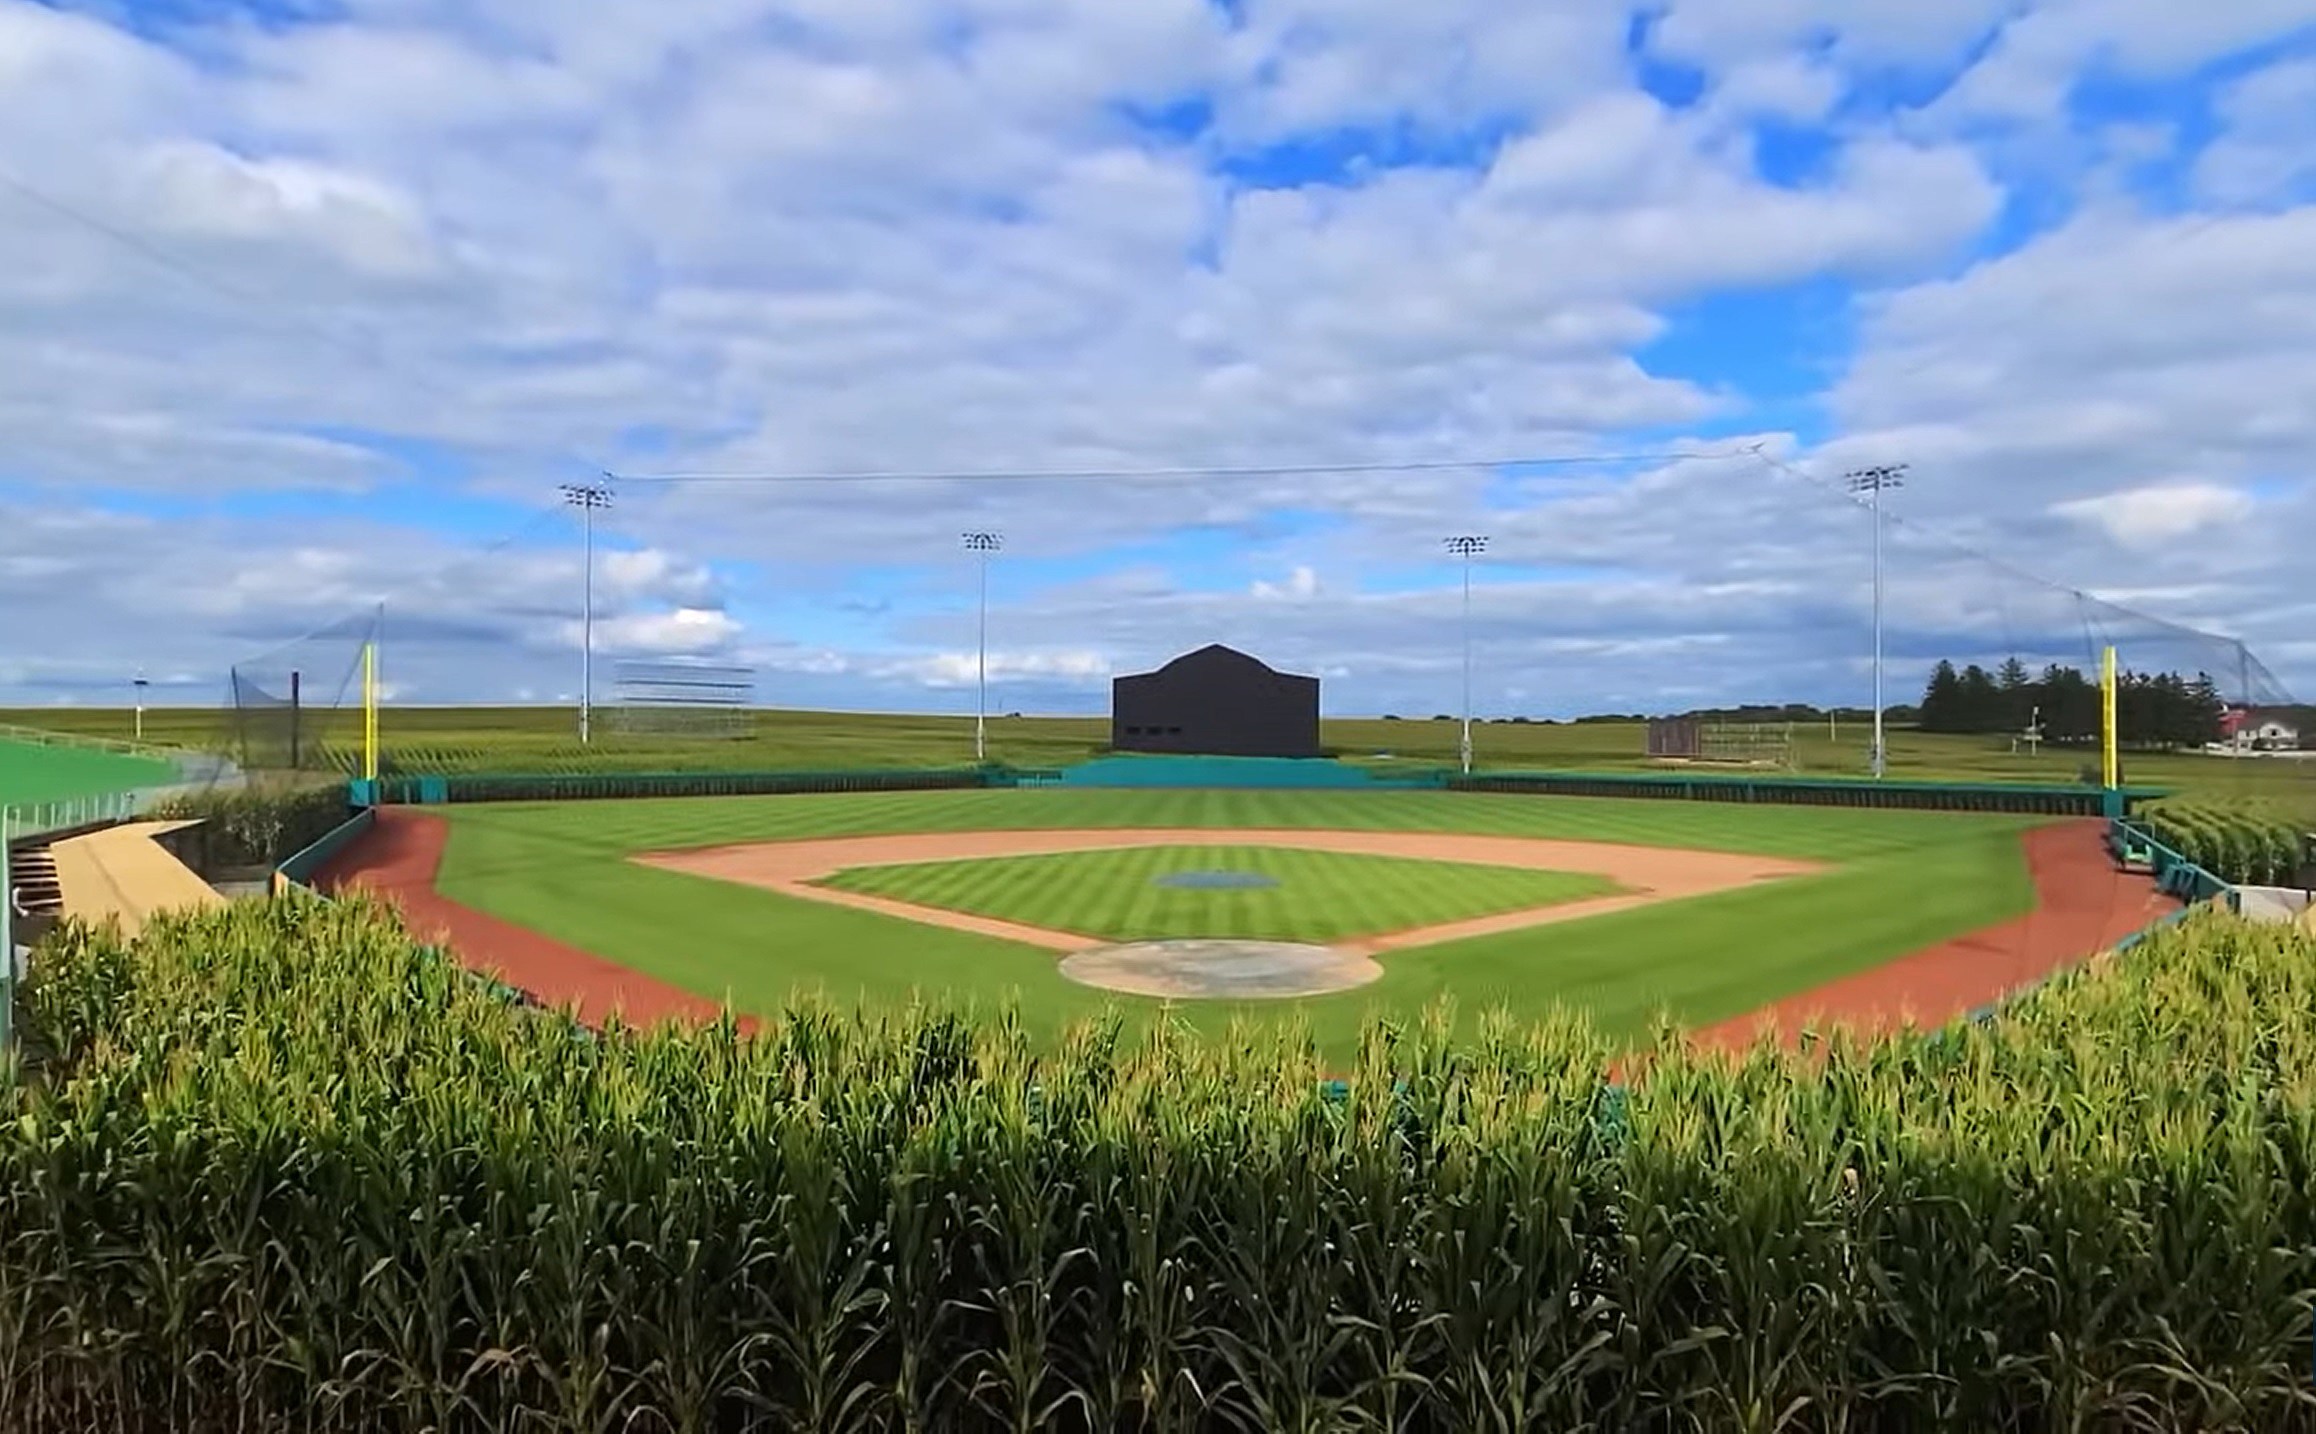 Field of Dreams game Ticket info things to know about MLB matchup